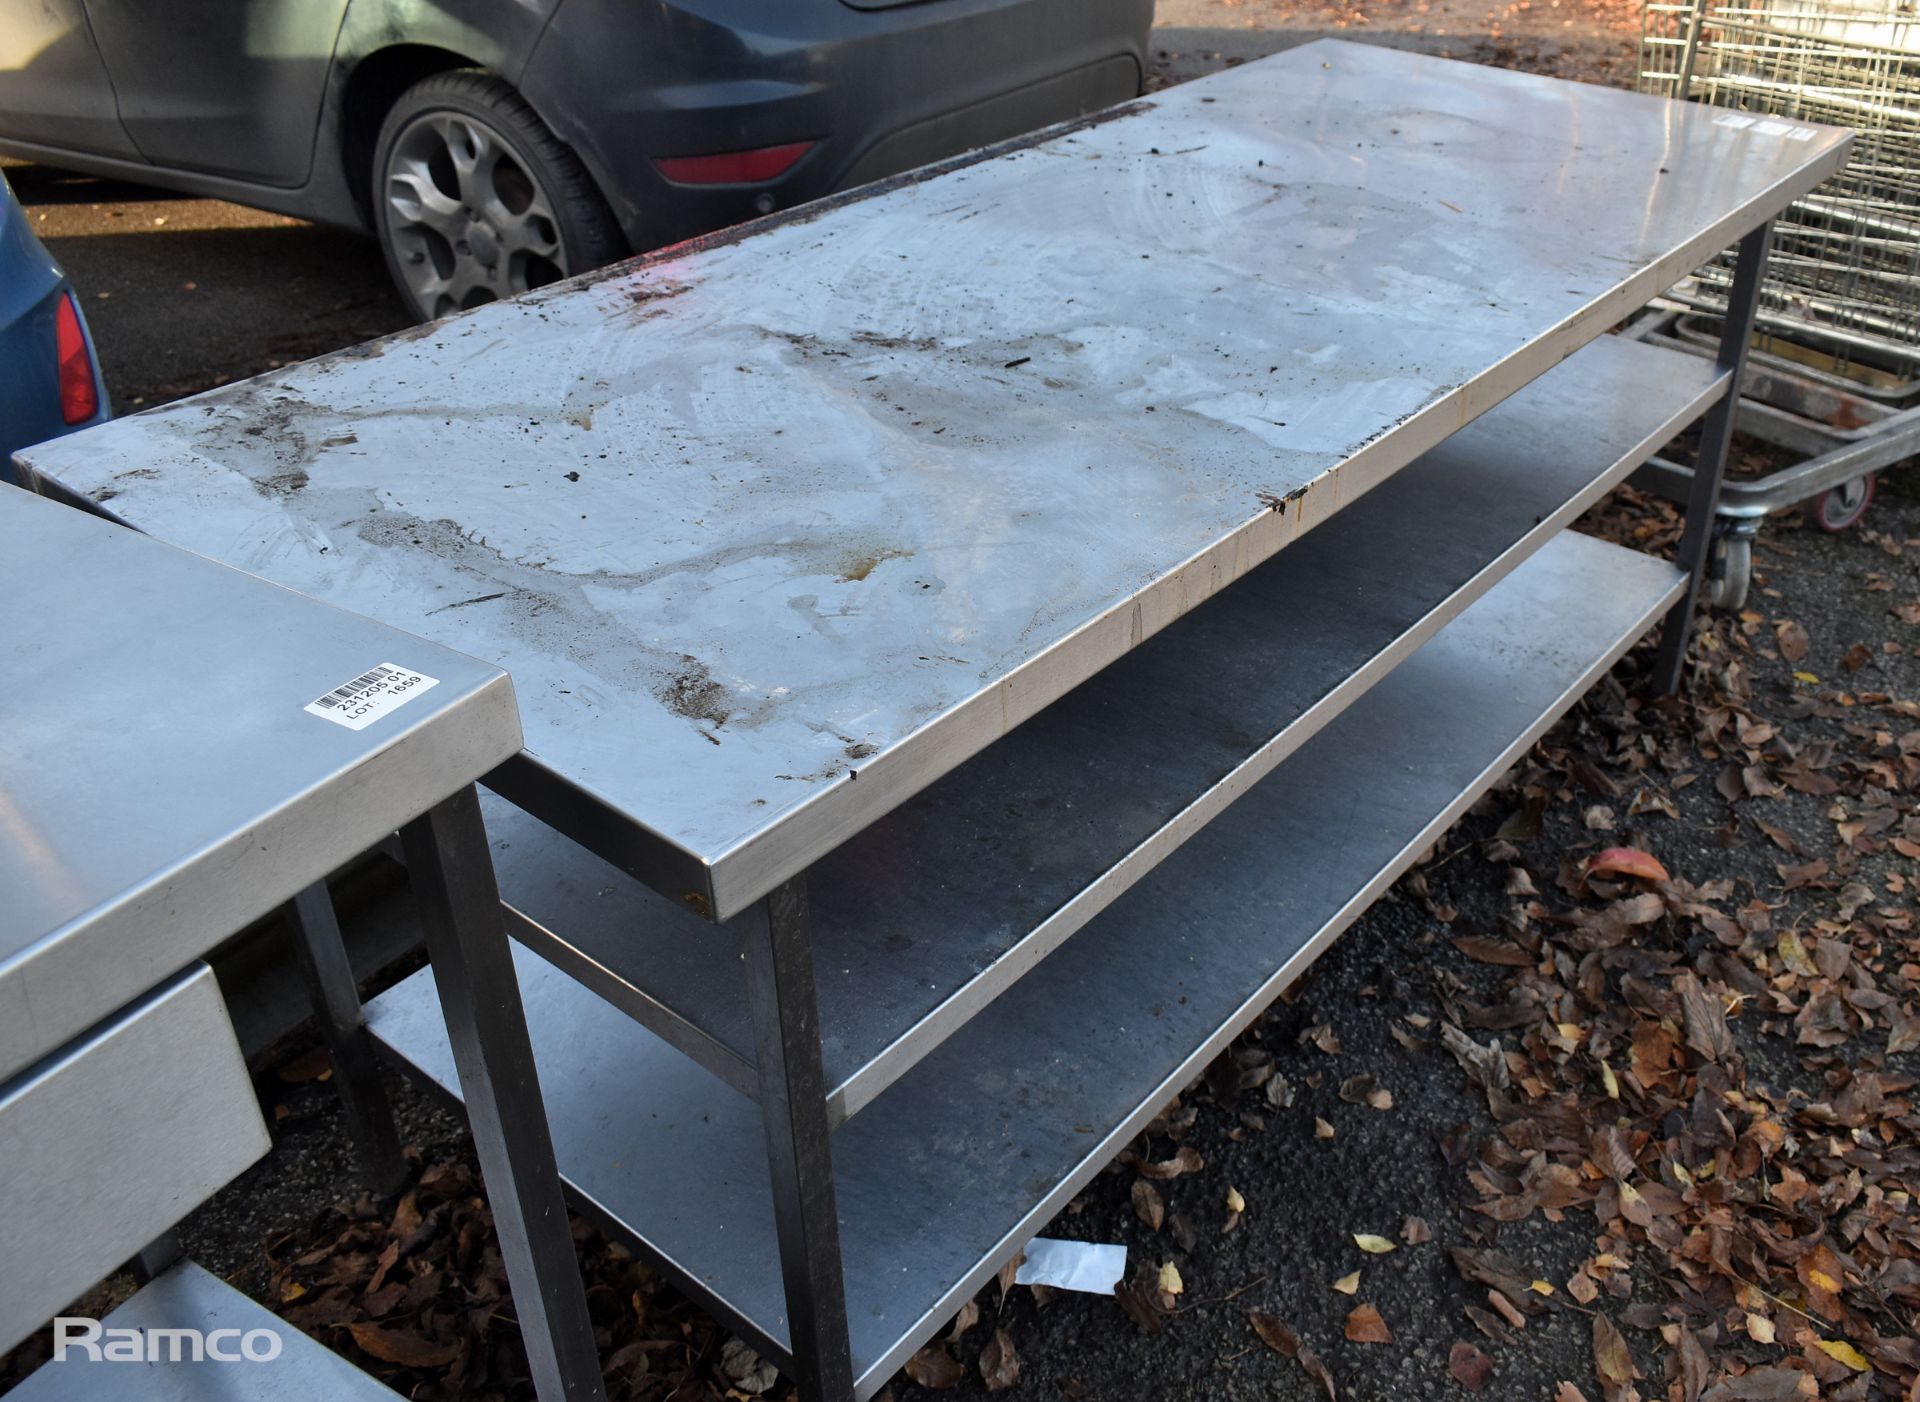 Stainless steel preparation table - L 1800 x W 750 x H 800mm - Image 3 of 3